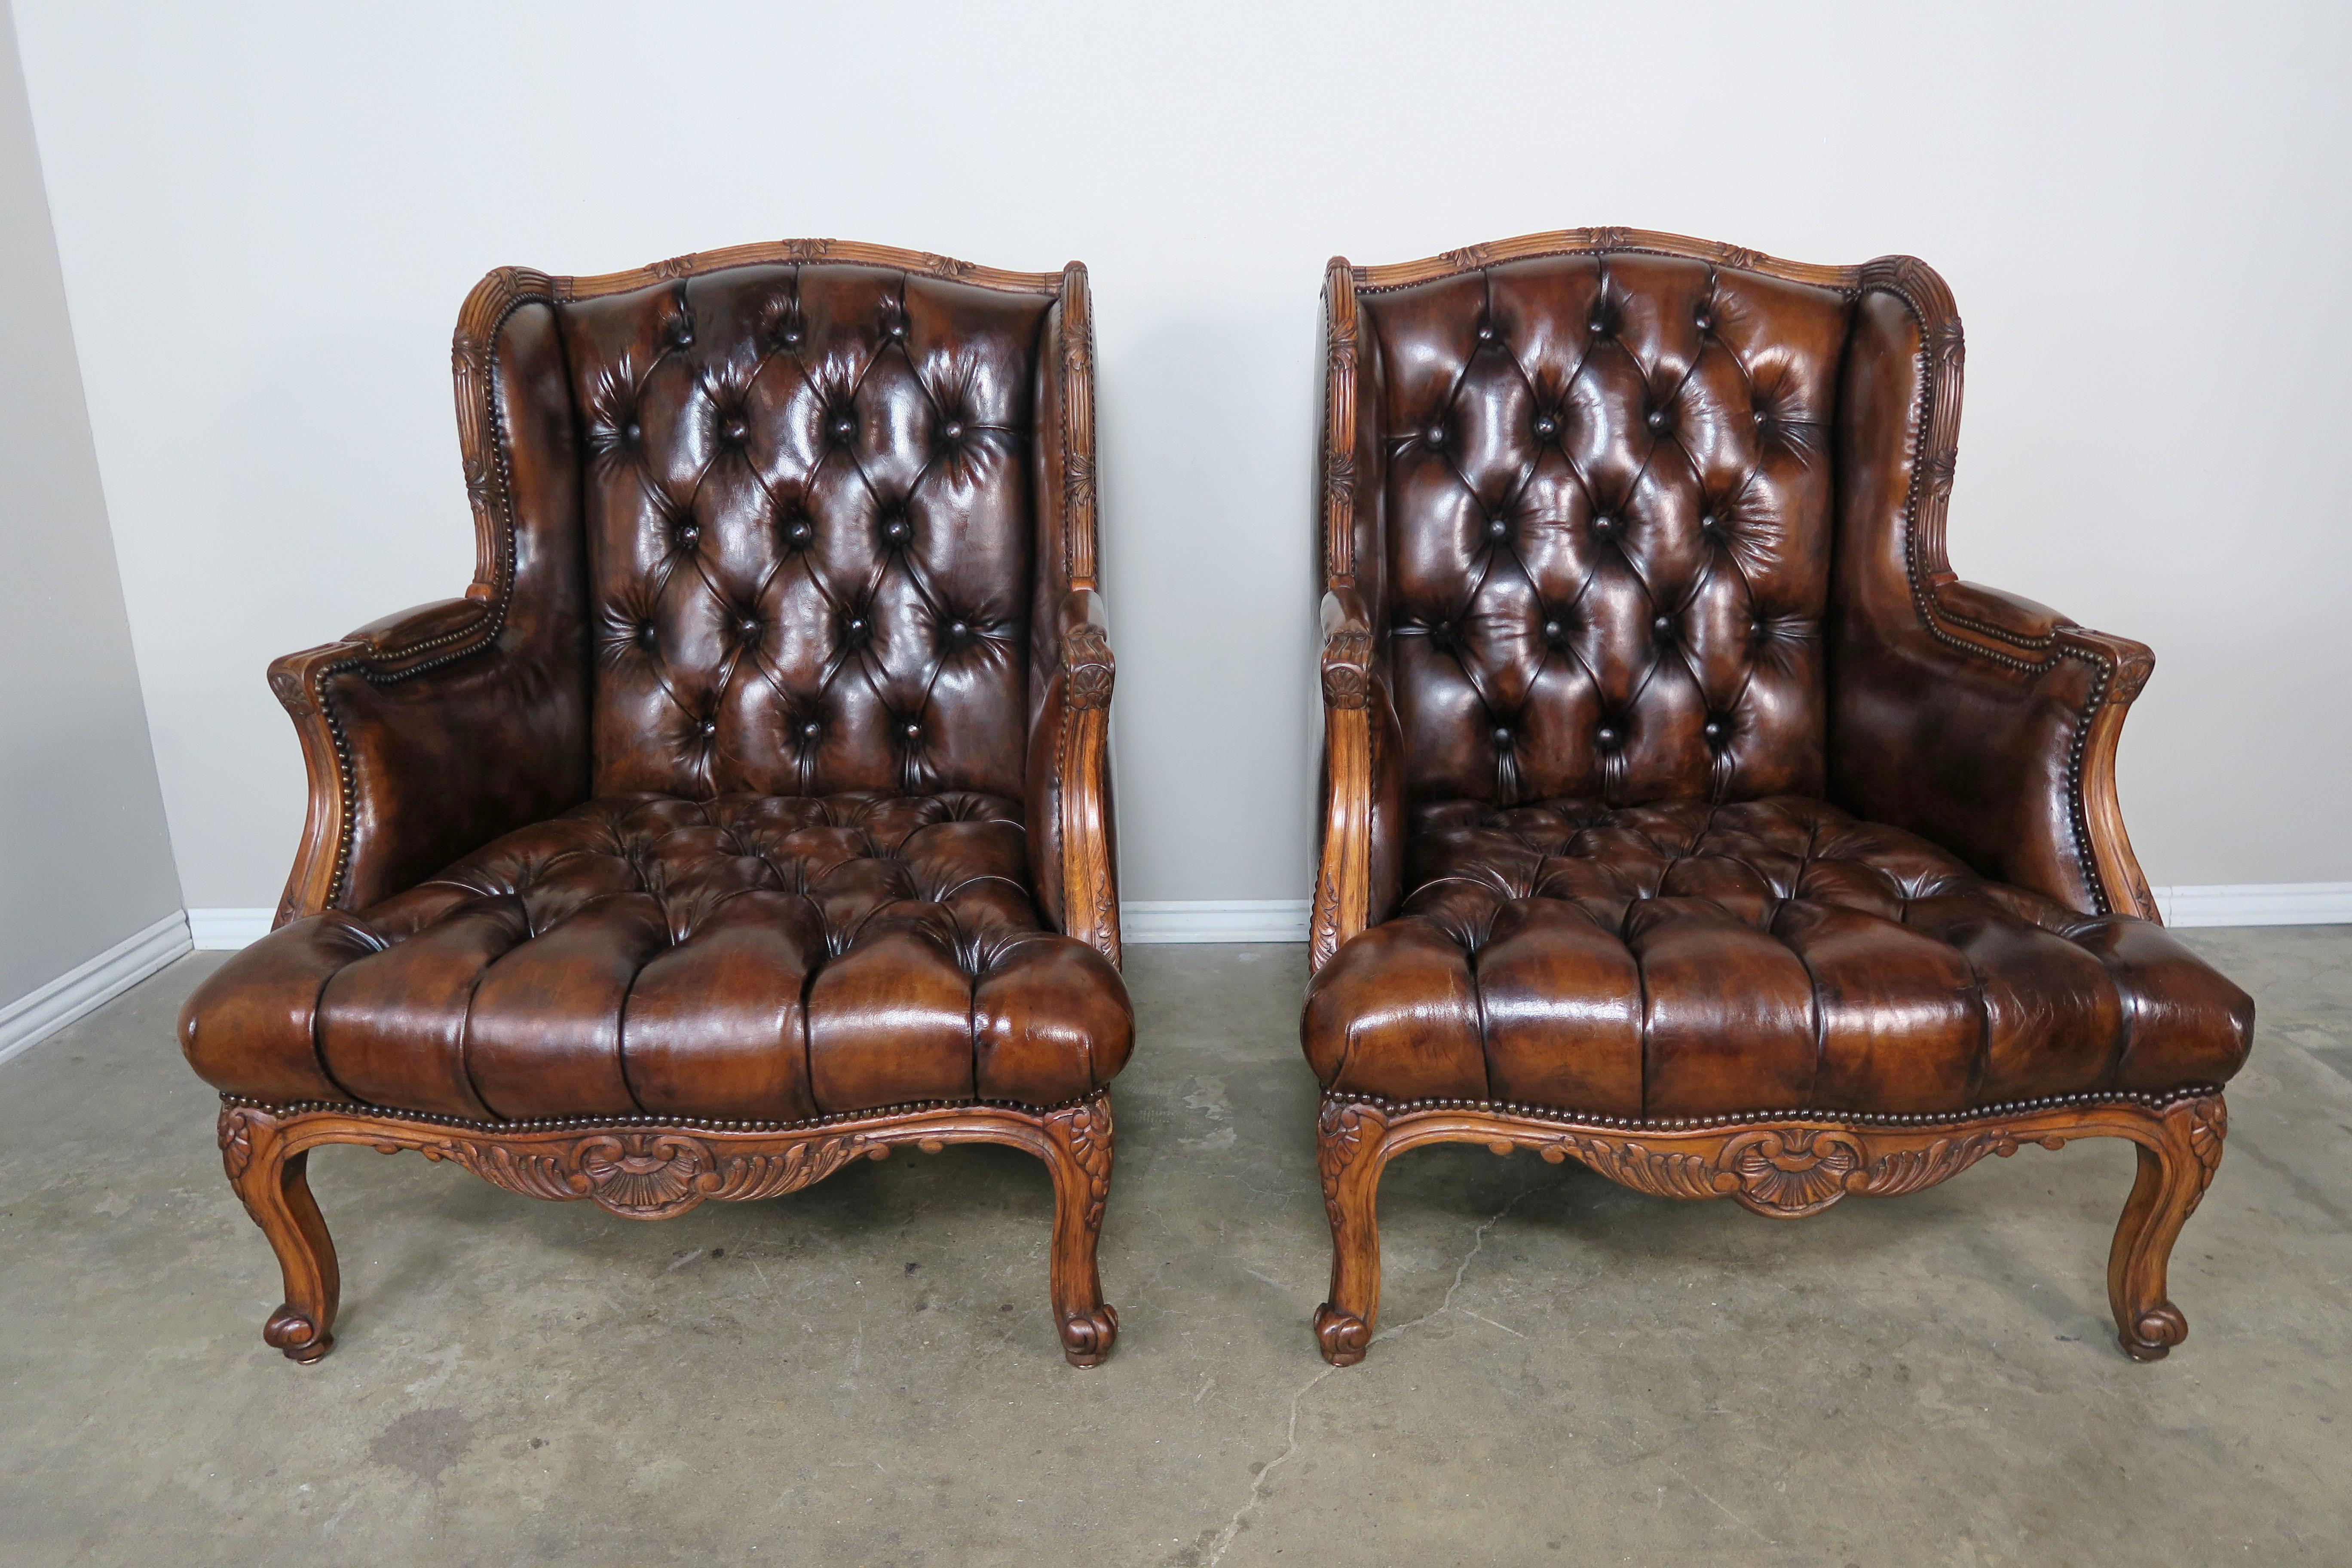 Louis XV Pair of French Leather Tufted Armchairs with Matching Ottomans